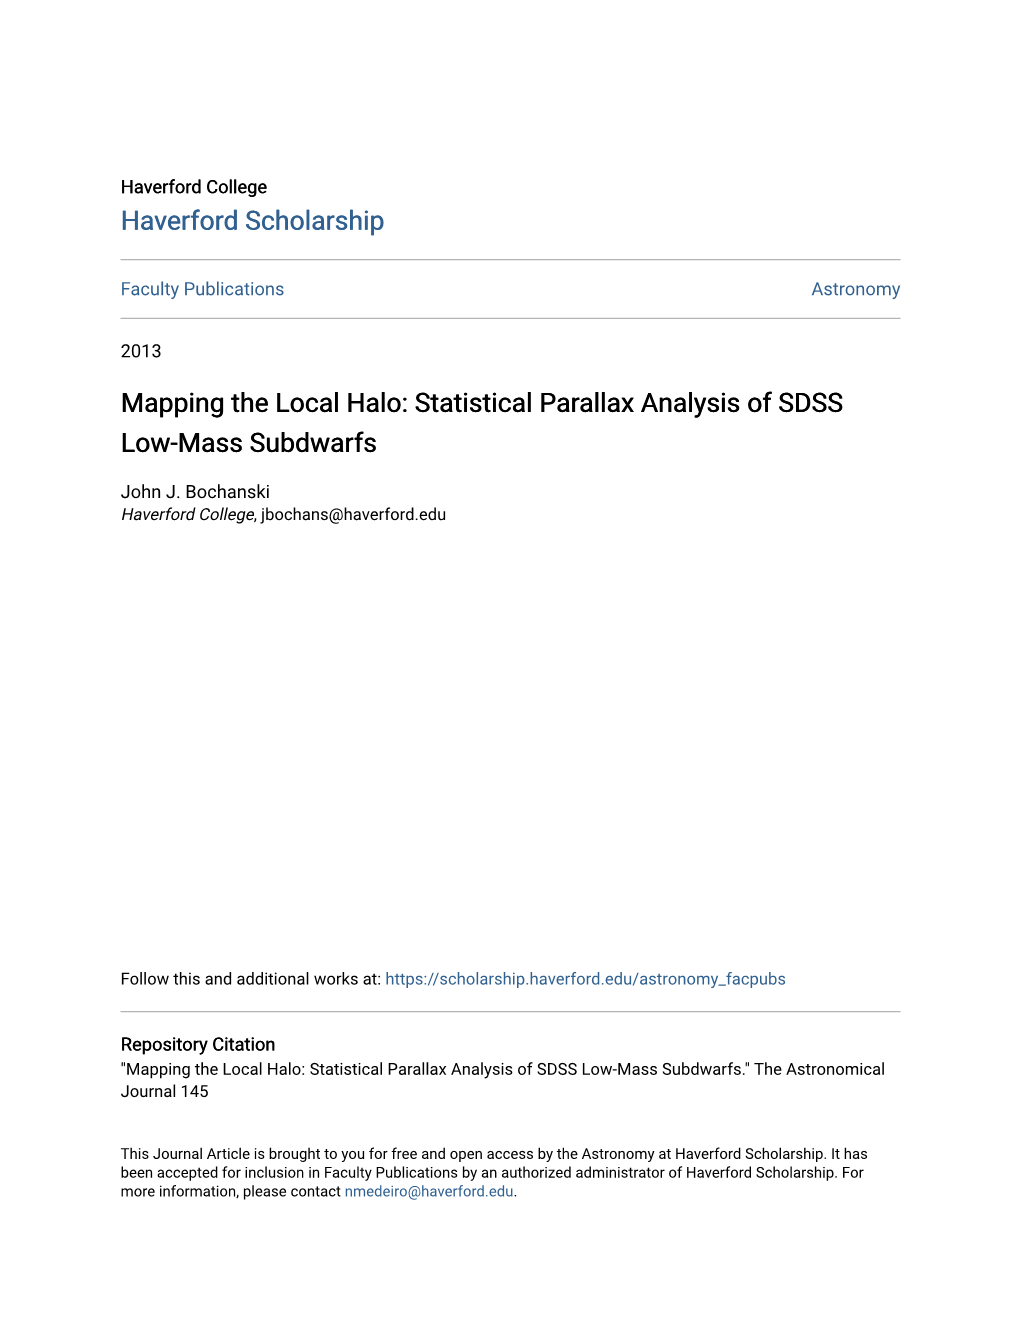 Mapping the Local Halo: Statistical Parallax Analysis of SDSS Low-Mass Subdwarfs